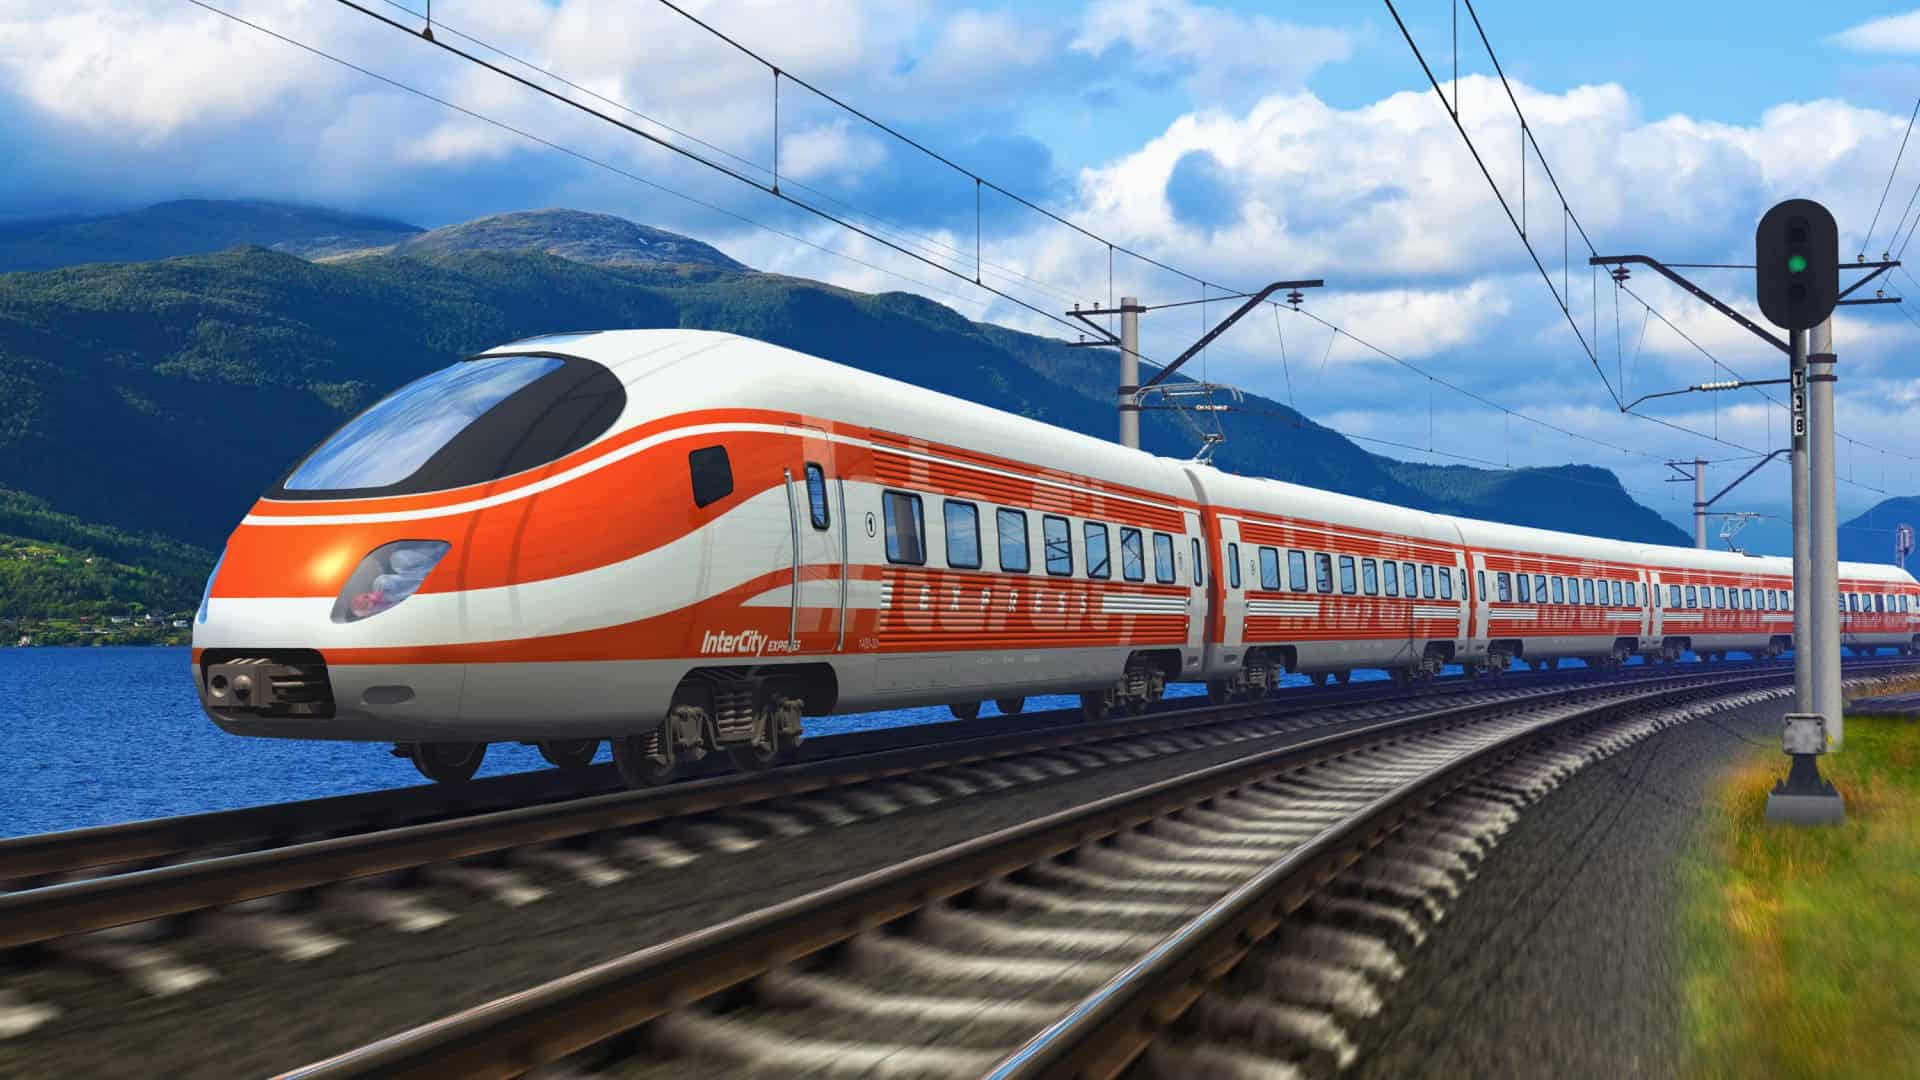 high speed train on a track with mountains in the background.